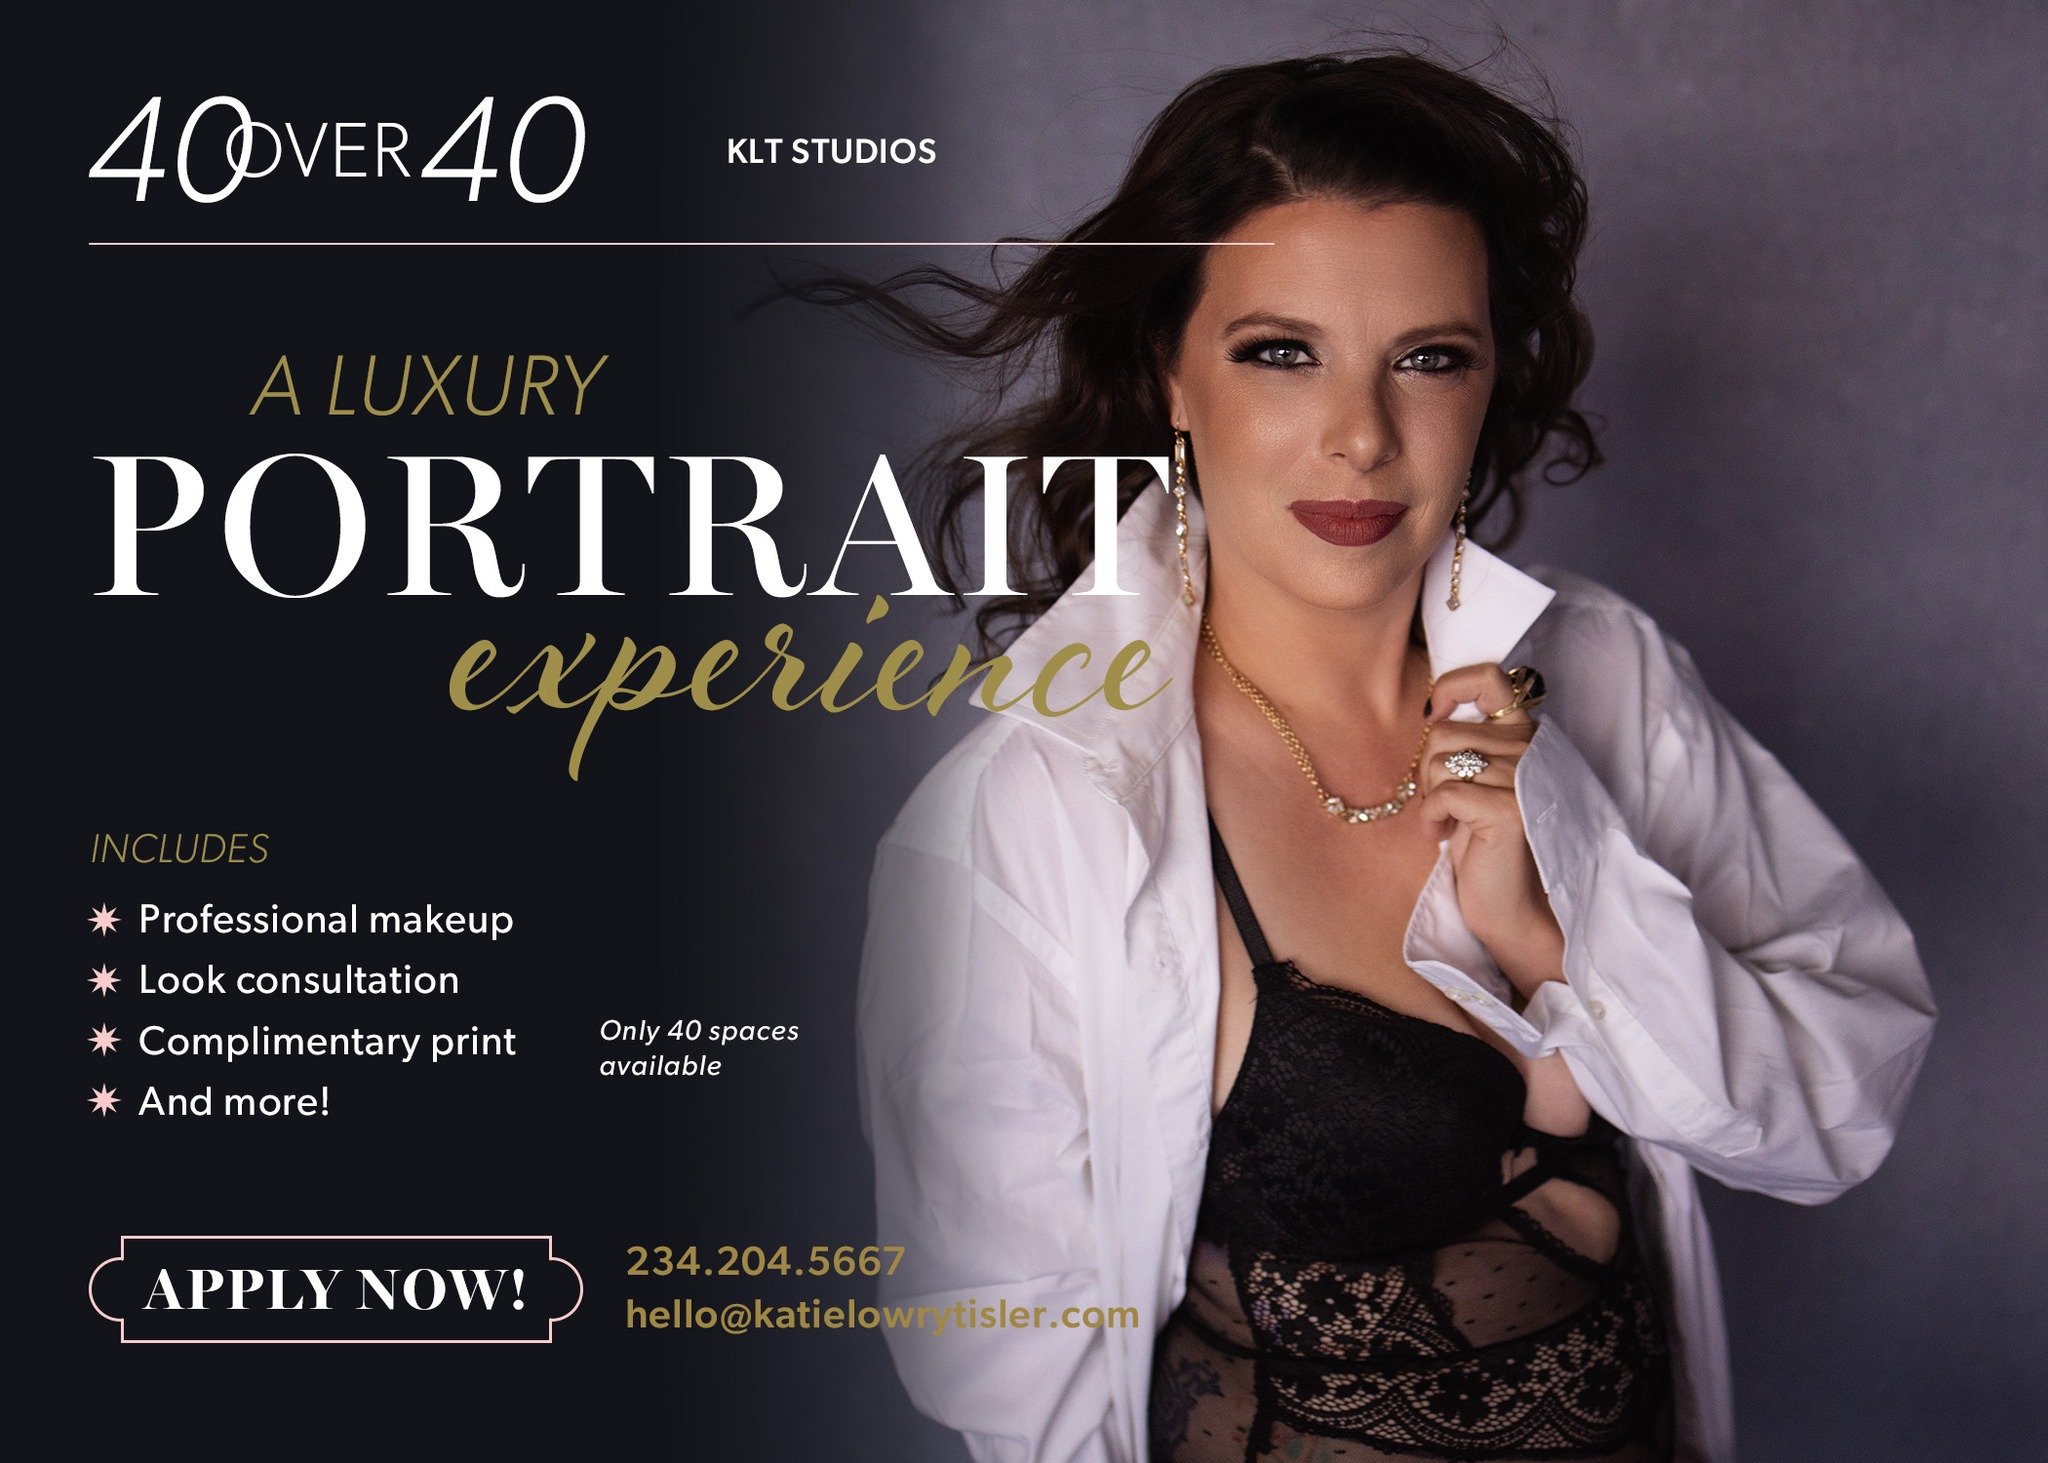 Join our exclusive 40 over 40 Project at KLT Studios and celebrate the beauty, wisdom, and achievements of life beyond 40. Participate in a professional photoshoot, share your inspiring story in our special magazine and book, and enjoy a glamorous ga